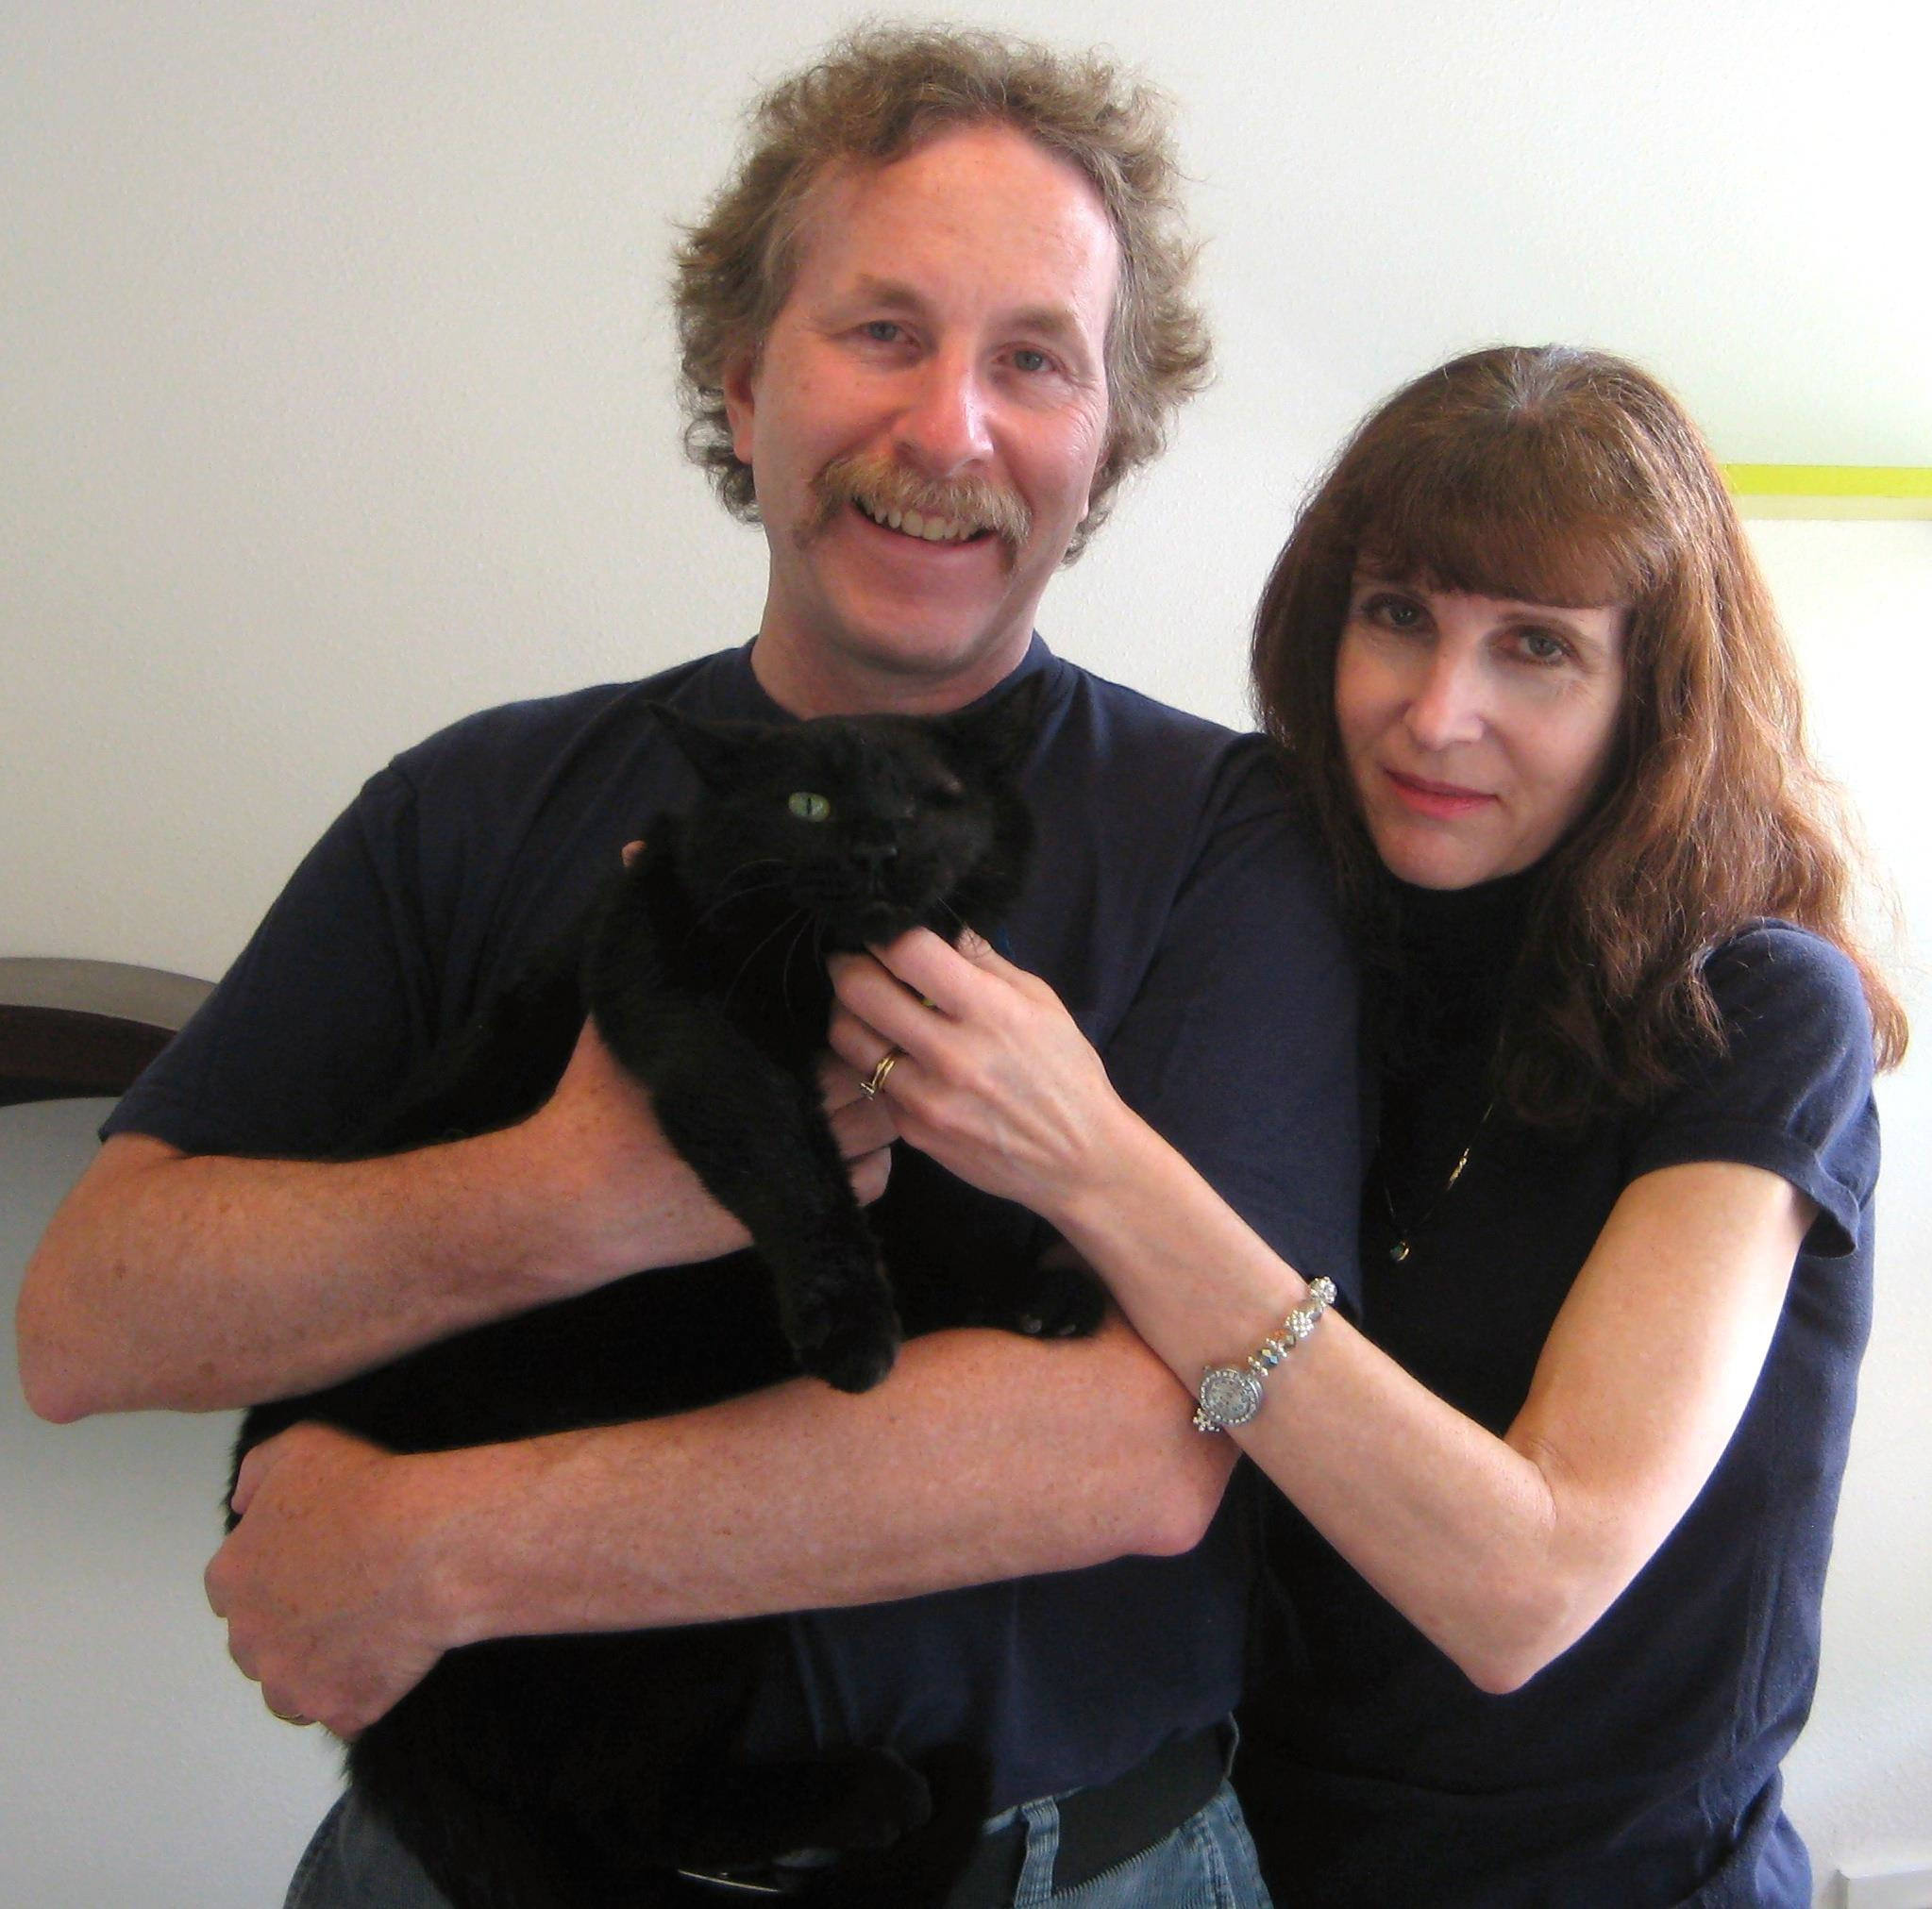 An adoption photo from PAWS Cat City in Seattle shows James Abney and wife Bethe Scalettar adopting their newest special-needs cat, Ranger.